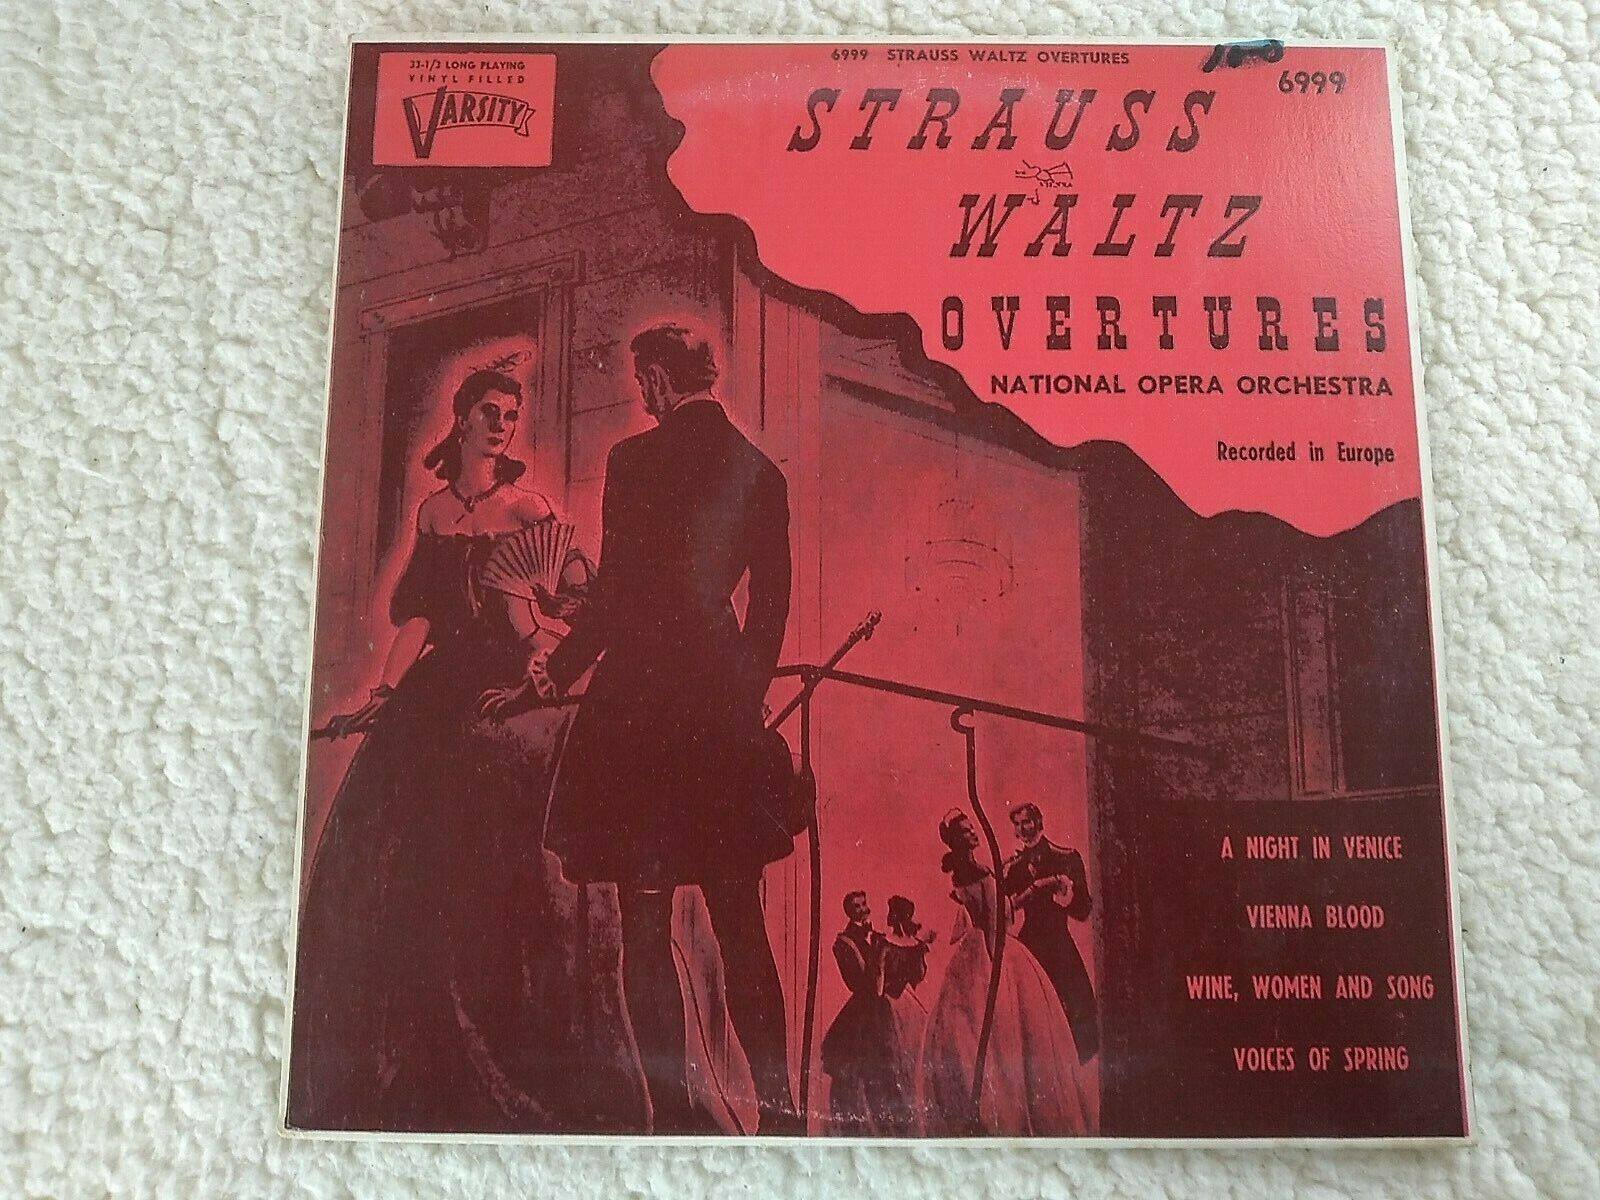 Primary image for STRAUSS Waltz Overtures NATIONAL OPERA ORCHESTRA 10" VARSITY RECORDS 6999